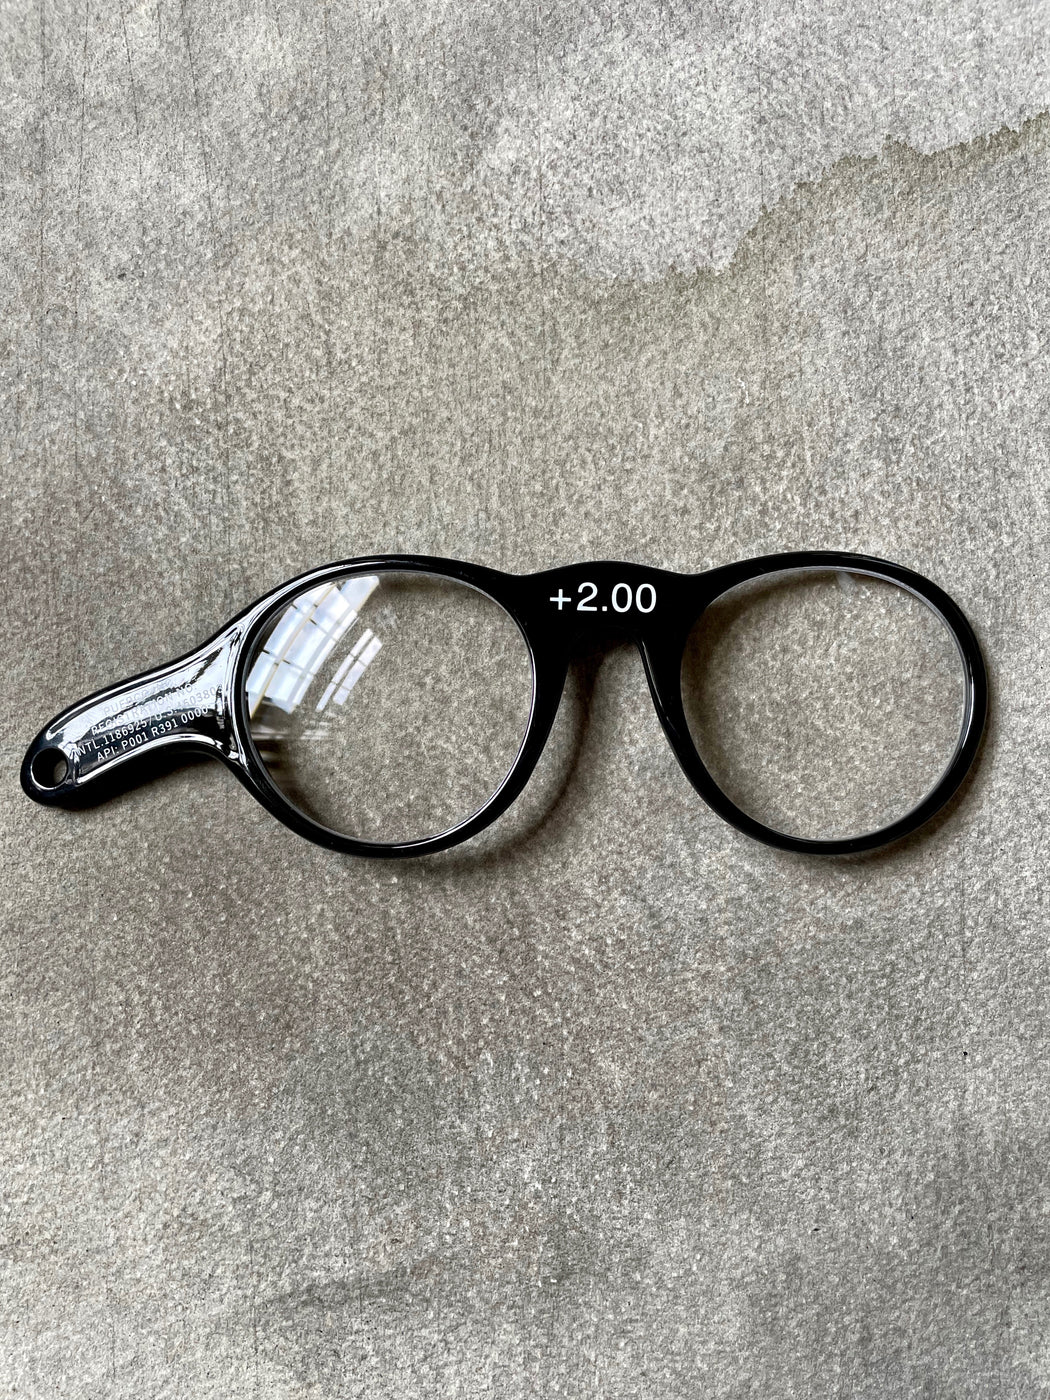 "Pince Nez" Magnifying Glass